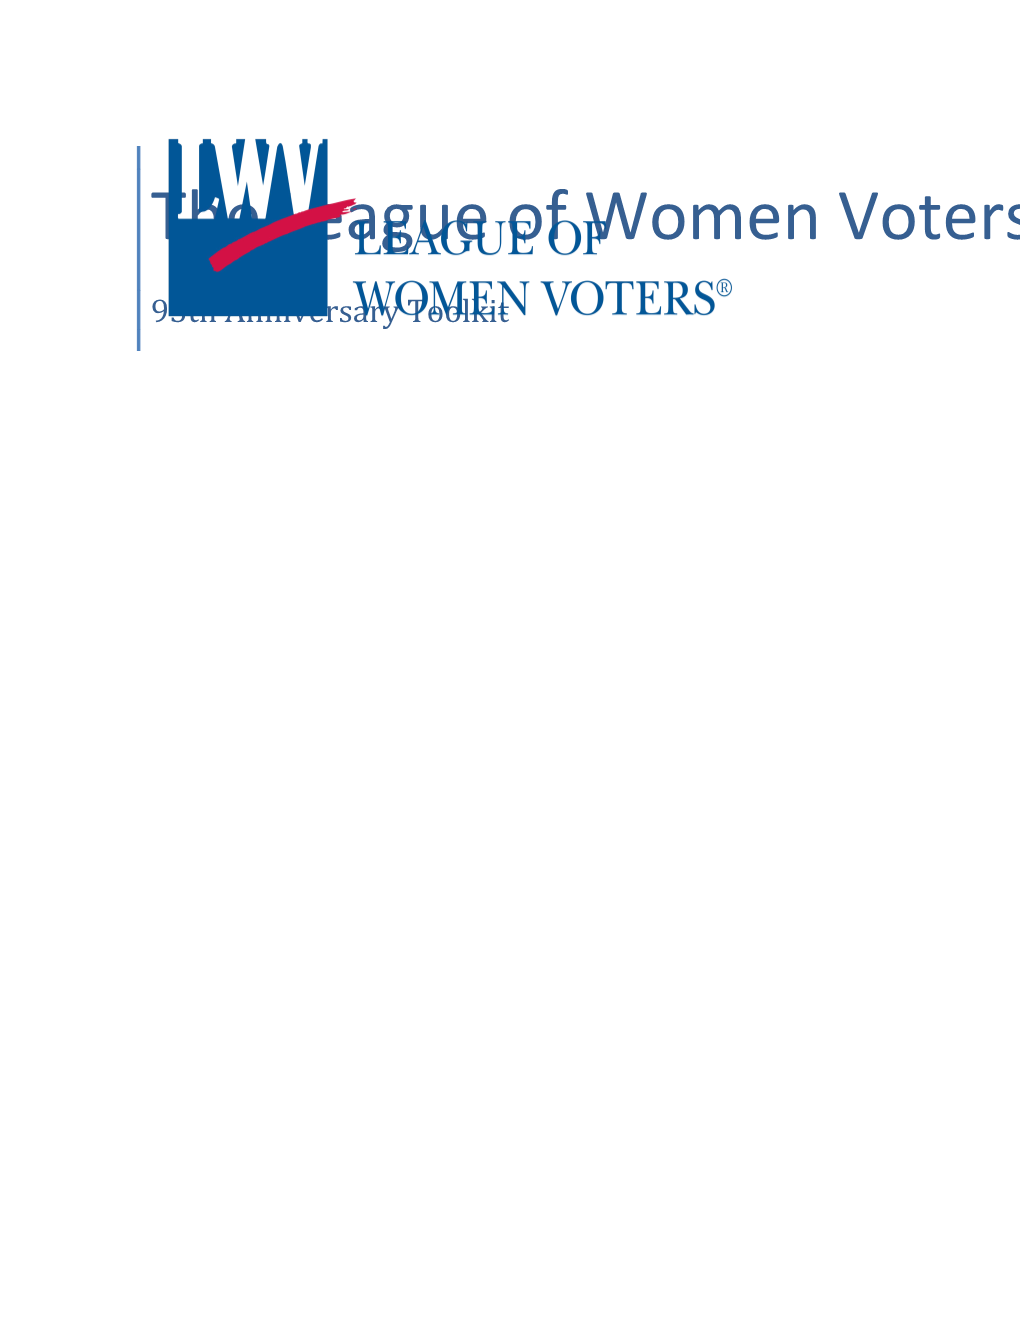 The League of Women Voters